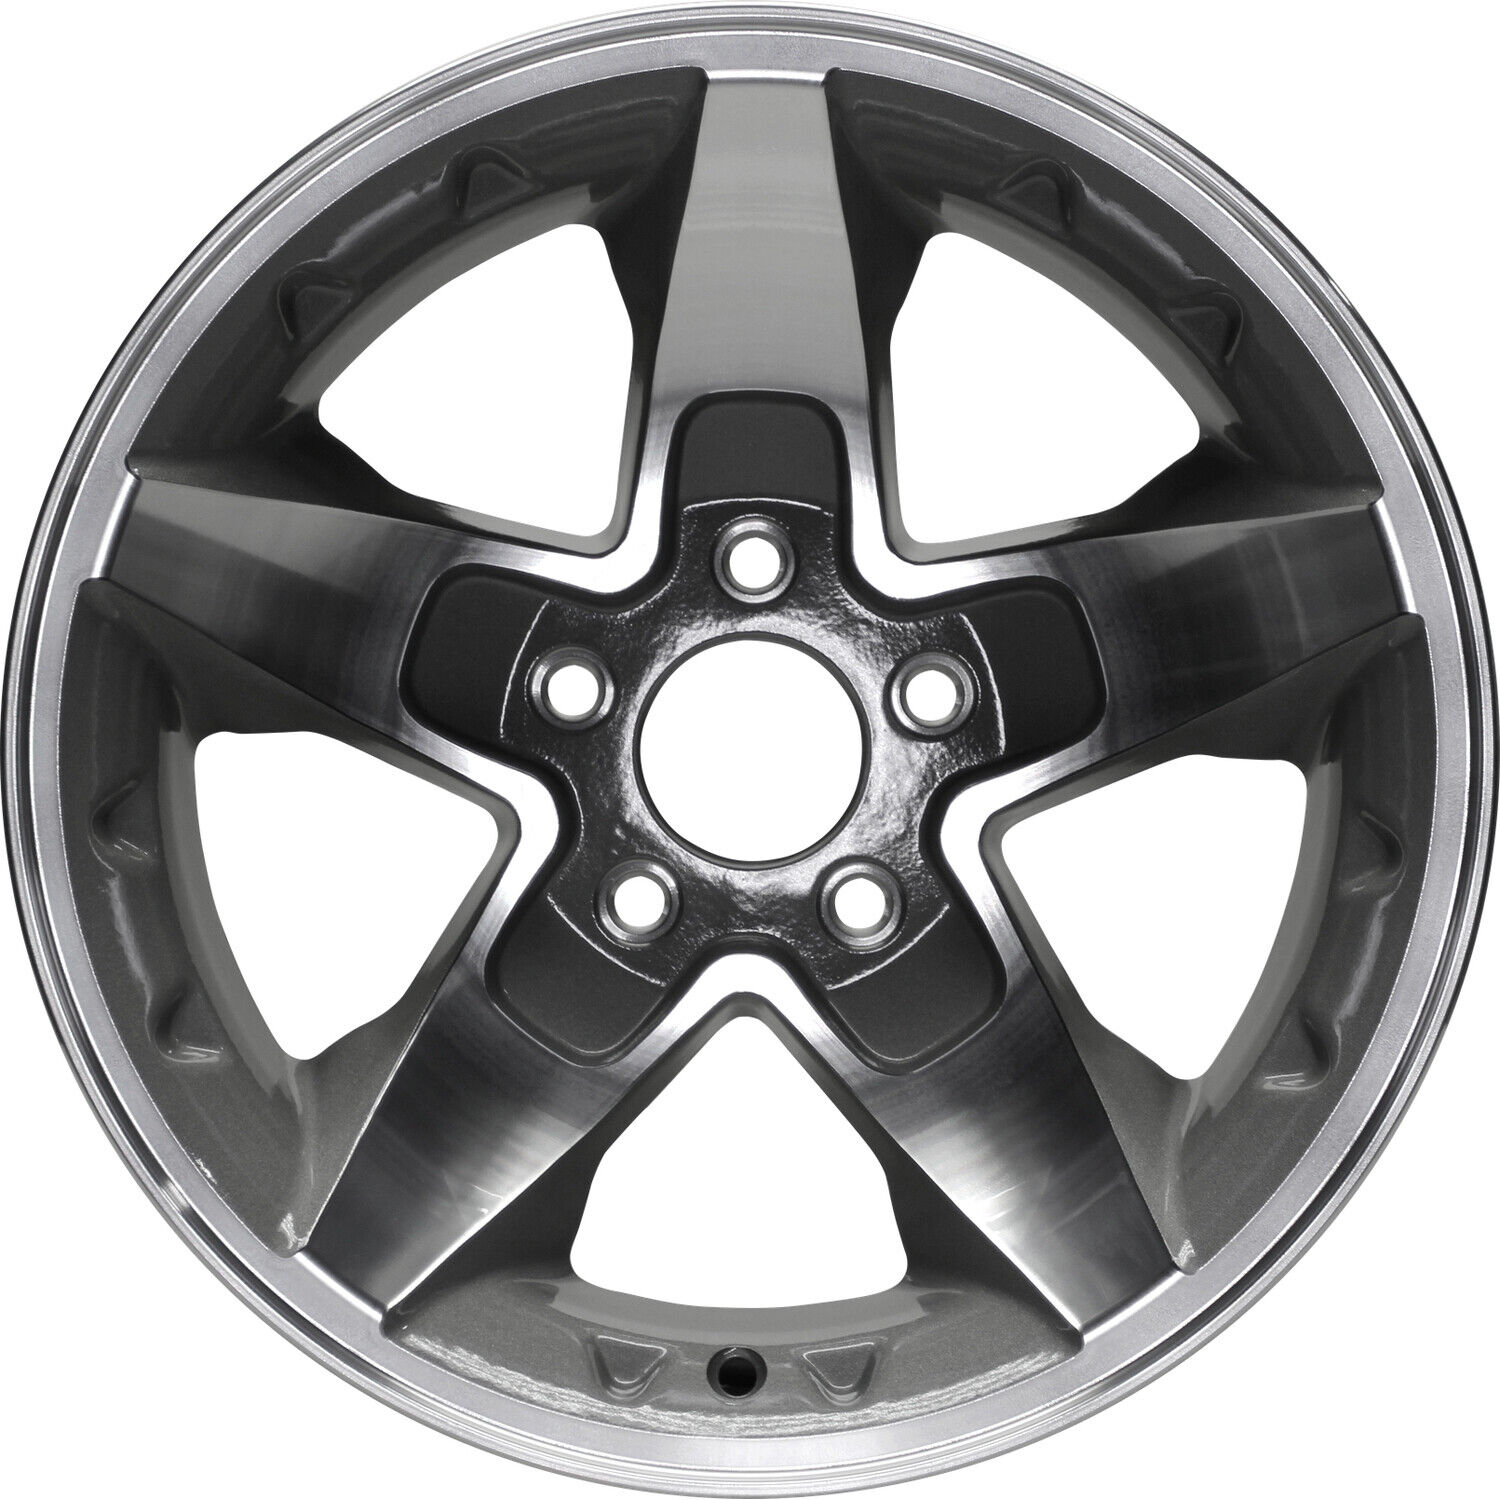 New 16x8 Machined and Painted Light Charcoal Wheel fits 560-05116